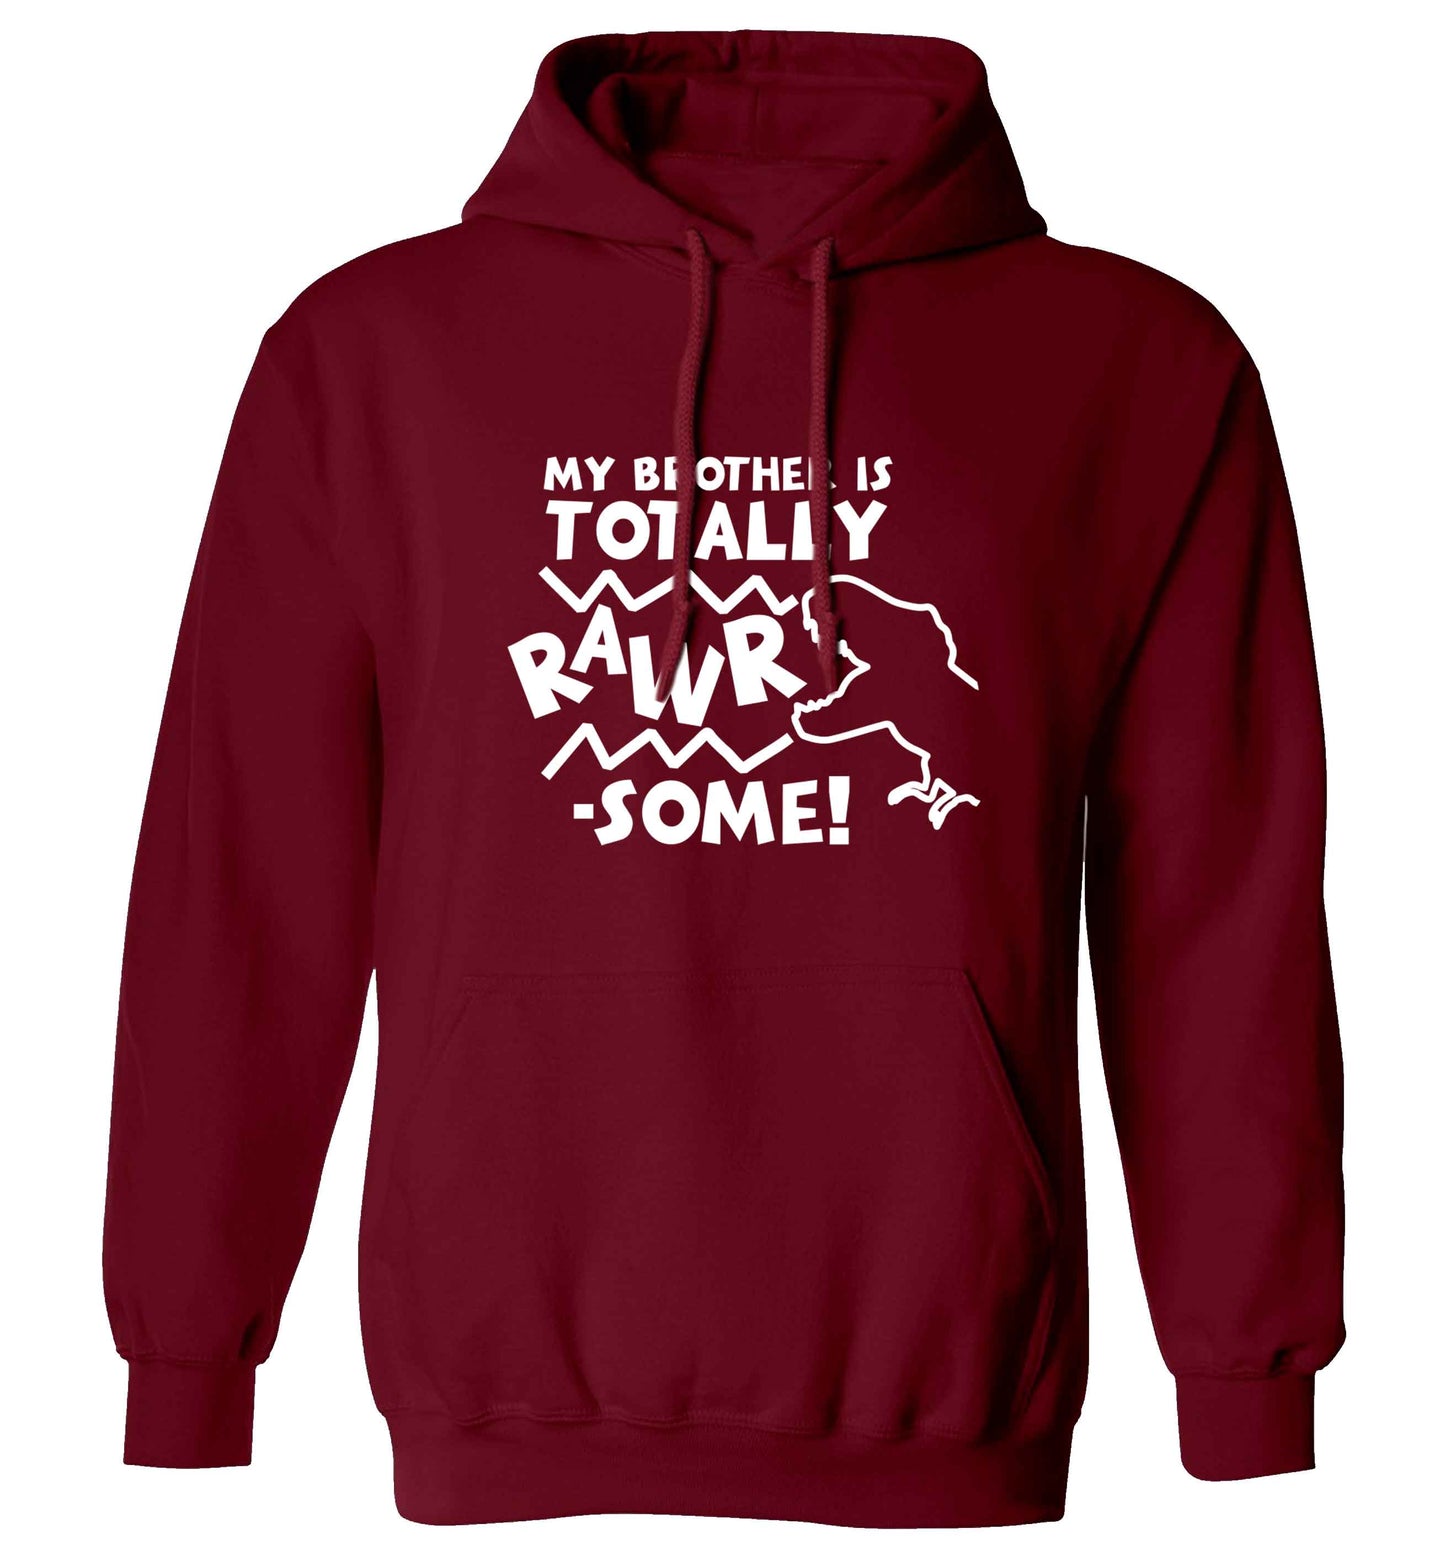 My brother is totally rawrsome adults unisex maroon hoodie 2XL